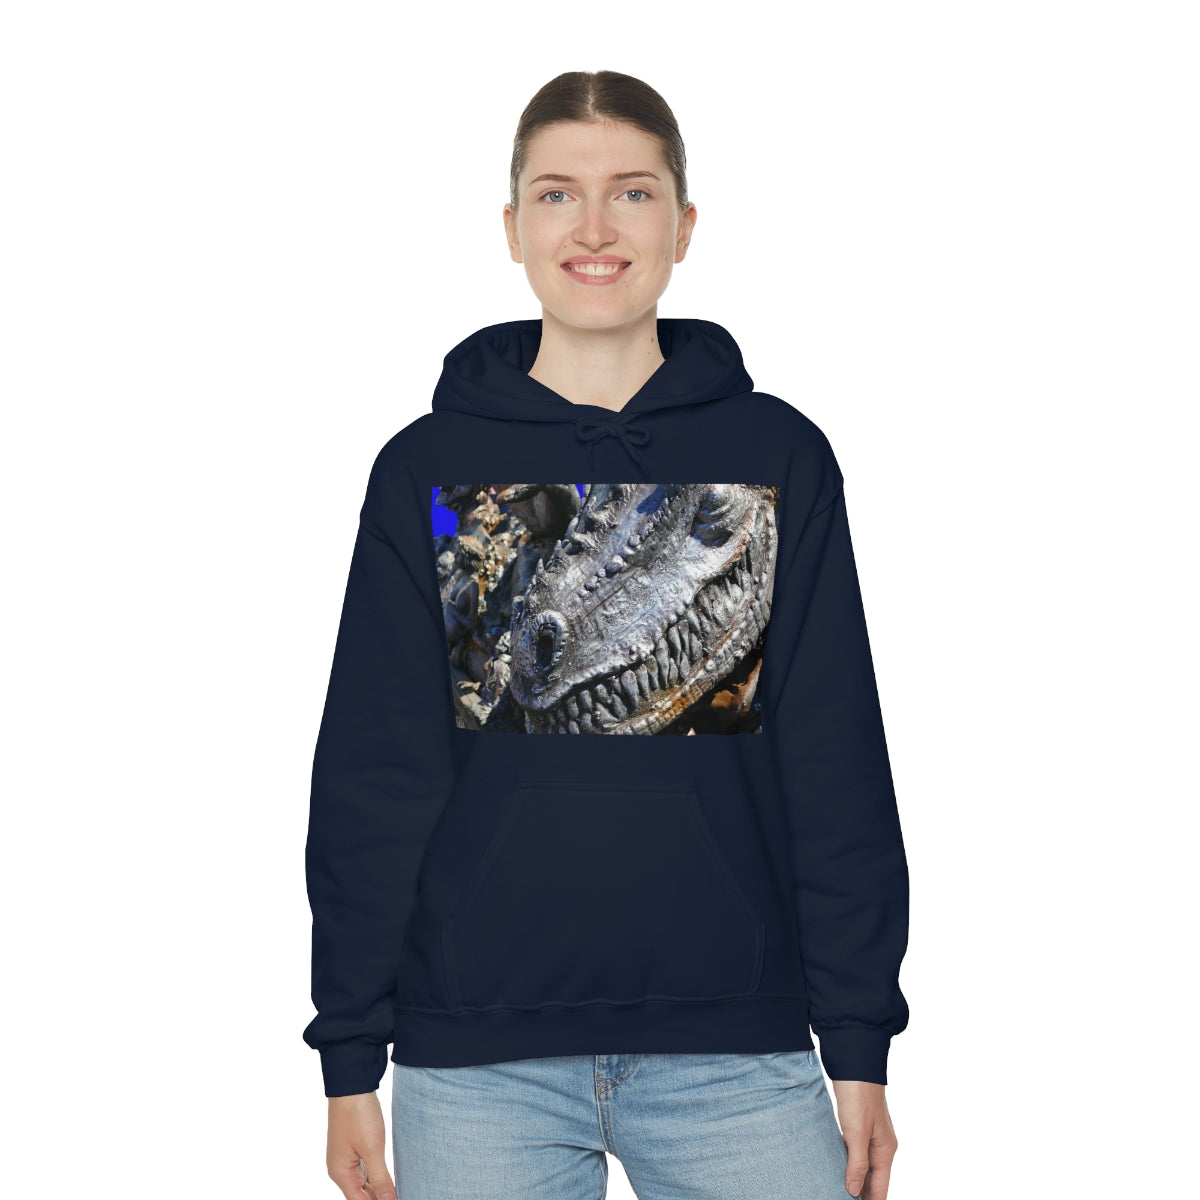 Delectable Vision - Unisex Heavy Blend Hooded Sweatshirt - Fry1Productions